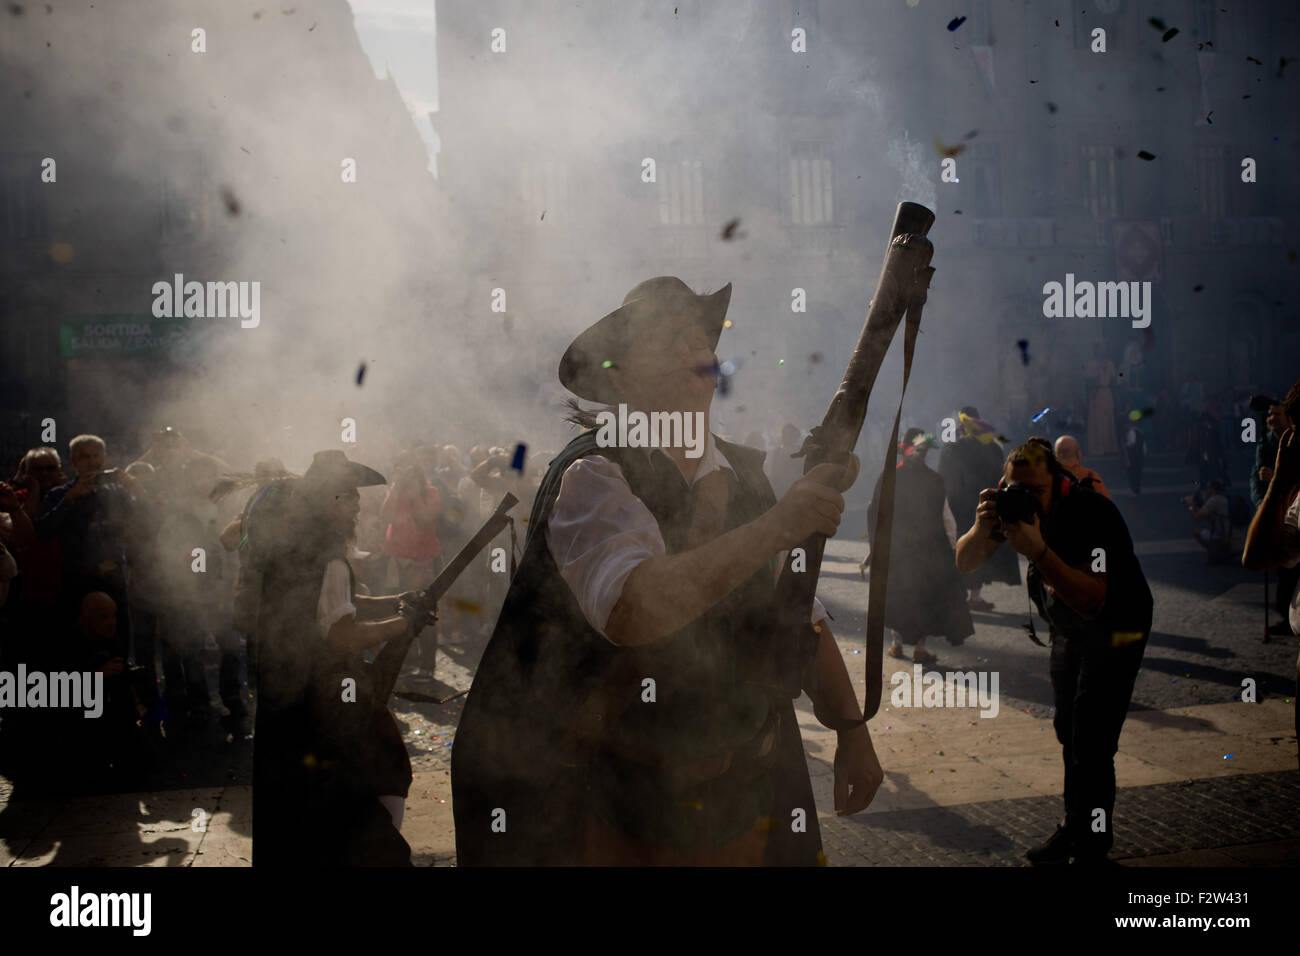 Barcelona, Catalonia, Spain. 24th Sep, 2015. Trabucaires shoot his blunderbuss through the streets of Barcelona on the occasion of the celebrations of the Merce Festival (Festes de la Merce) on 24 September 2015, Spain. The Galejada Trabucairemarks the beginning of the day of the patron saint of Barcelona, La Merce. Men and women dressed as ancient Catalan bandits take to the streets of the old part of Barcelona and cause a loud noise with his blunderbusses full of gunpowder. © Jordi Boixareu/ZUMA Wire/Alamy Live News Stock Photo